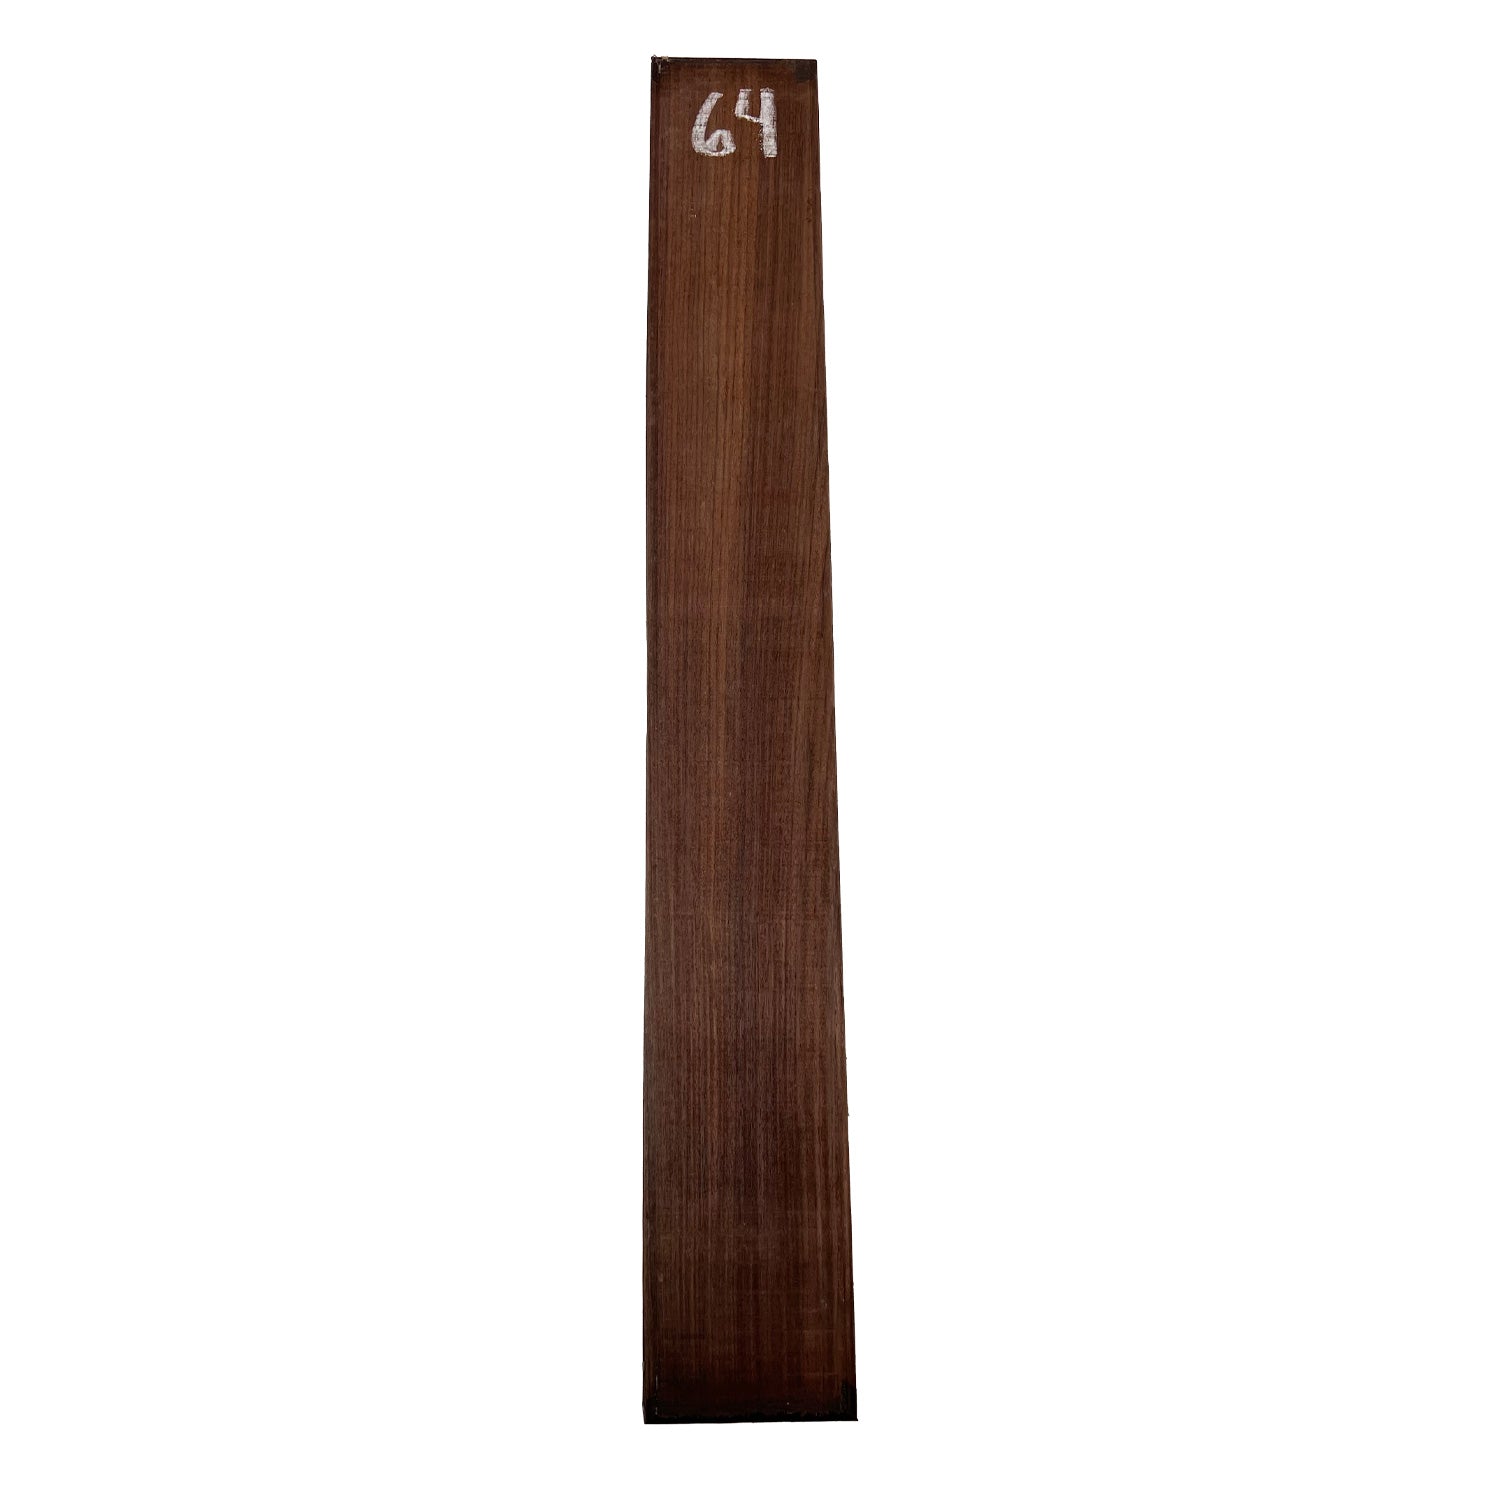 East Indian Rosewood Electrical/ Bass Wood Guitar Neck Blank 31&quot;x4&quot;x1 1/4&quot; 